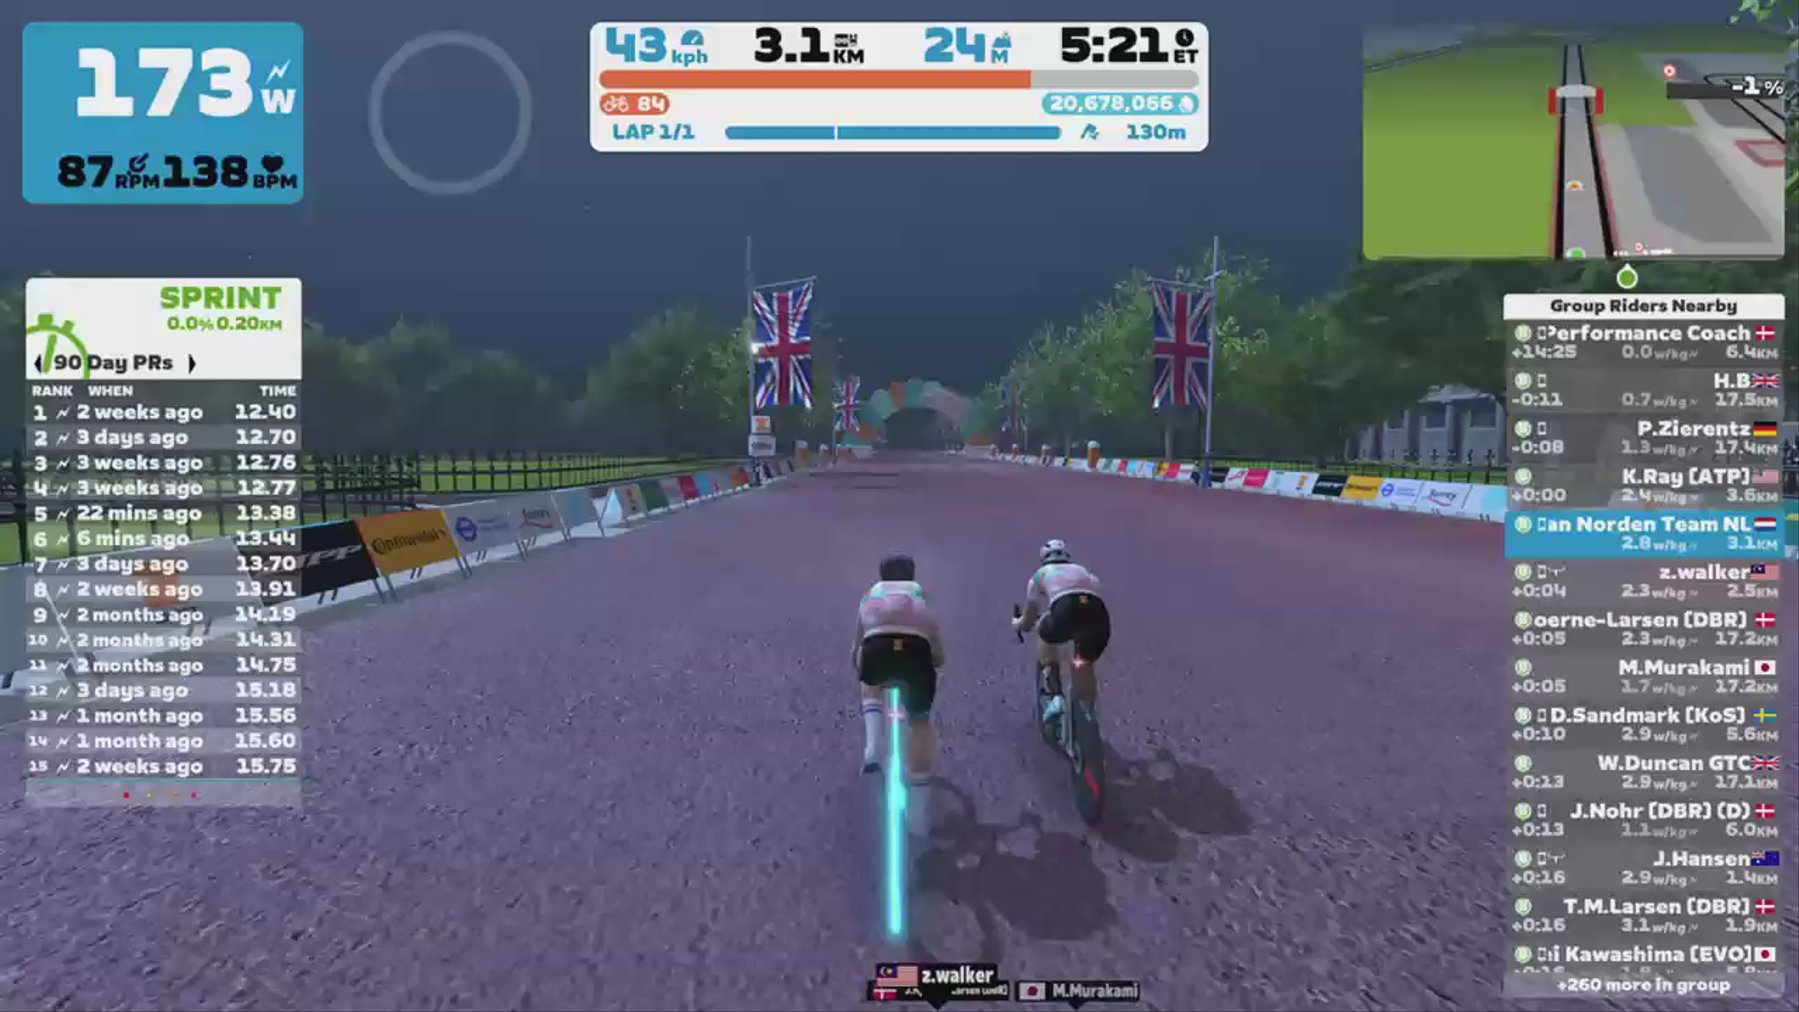 Zwift - Group Ride: Standard | Stage 2 | The Zwift Big Spin 2024 on Greater London Flat in London